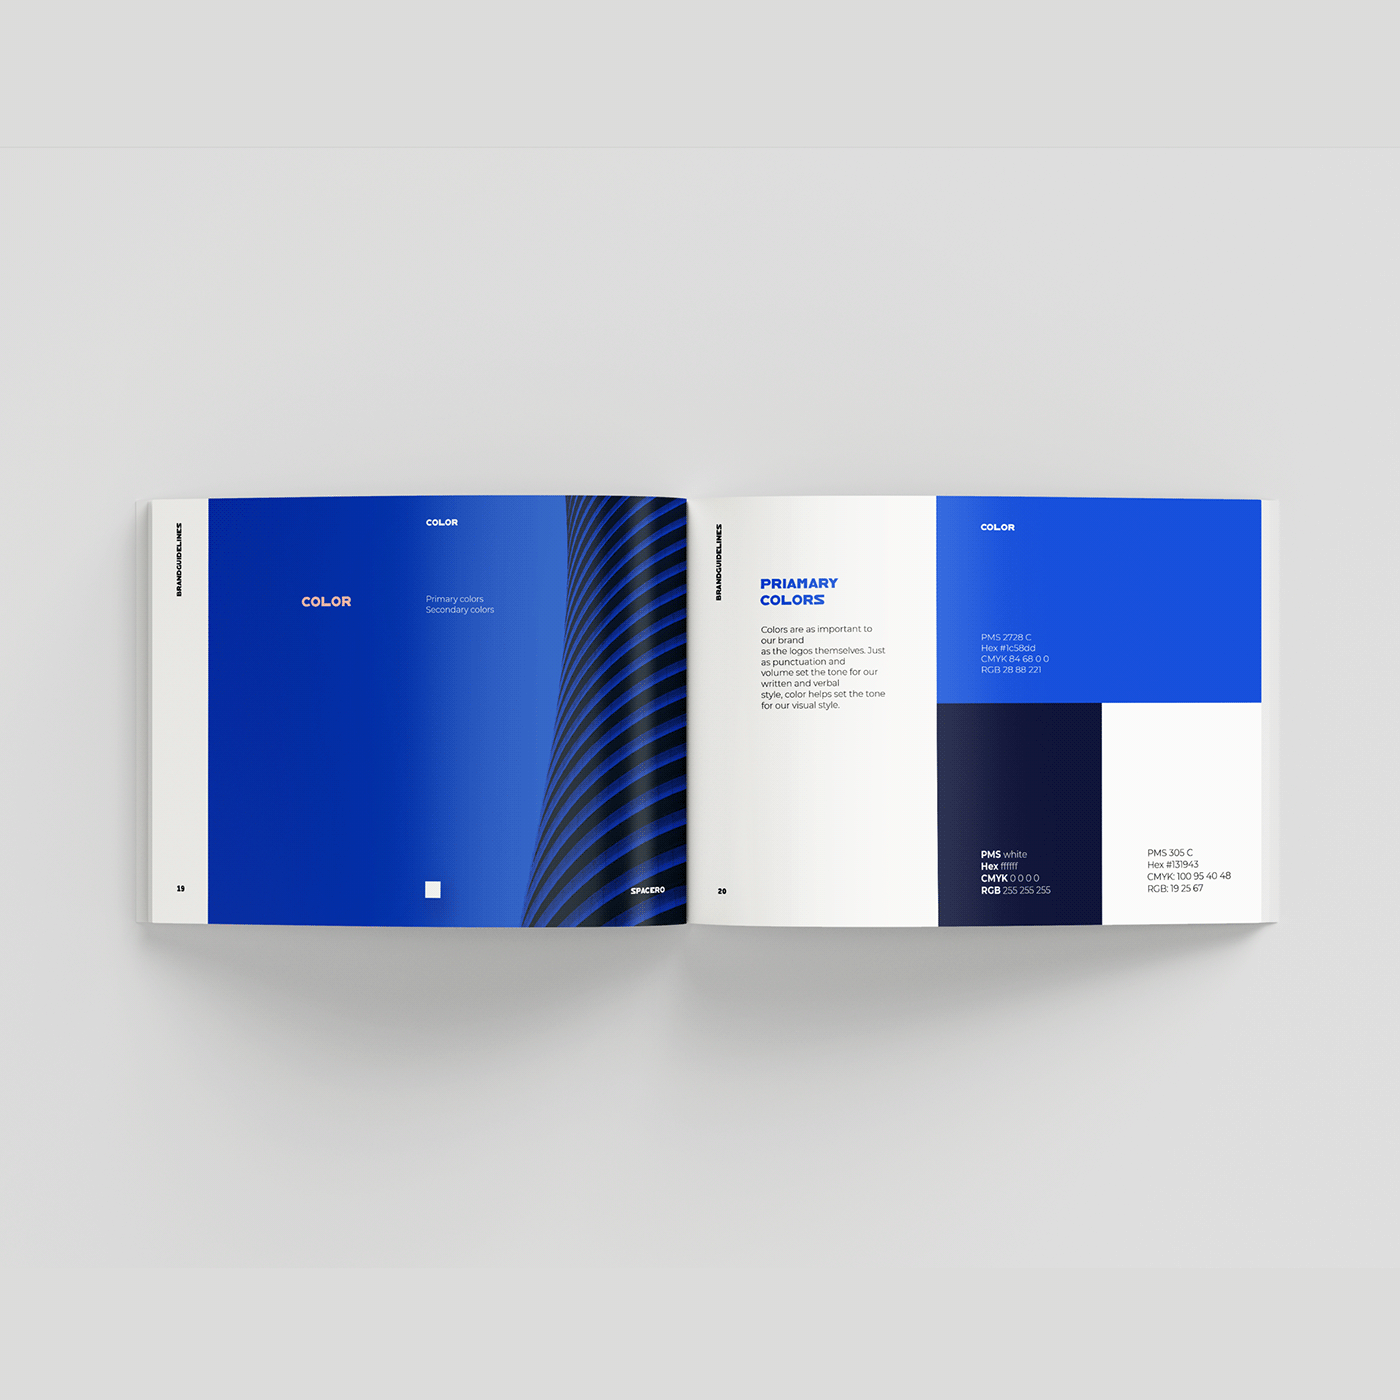 brand book brand guidelines brand style kit free brand guidelines paid brand guidelines Style Guide brand guide template brand manual template free brand book manual brand